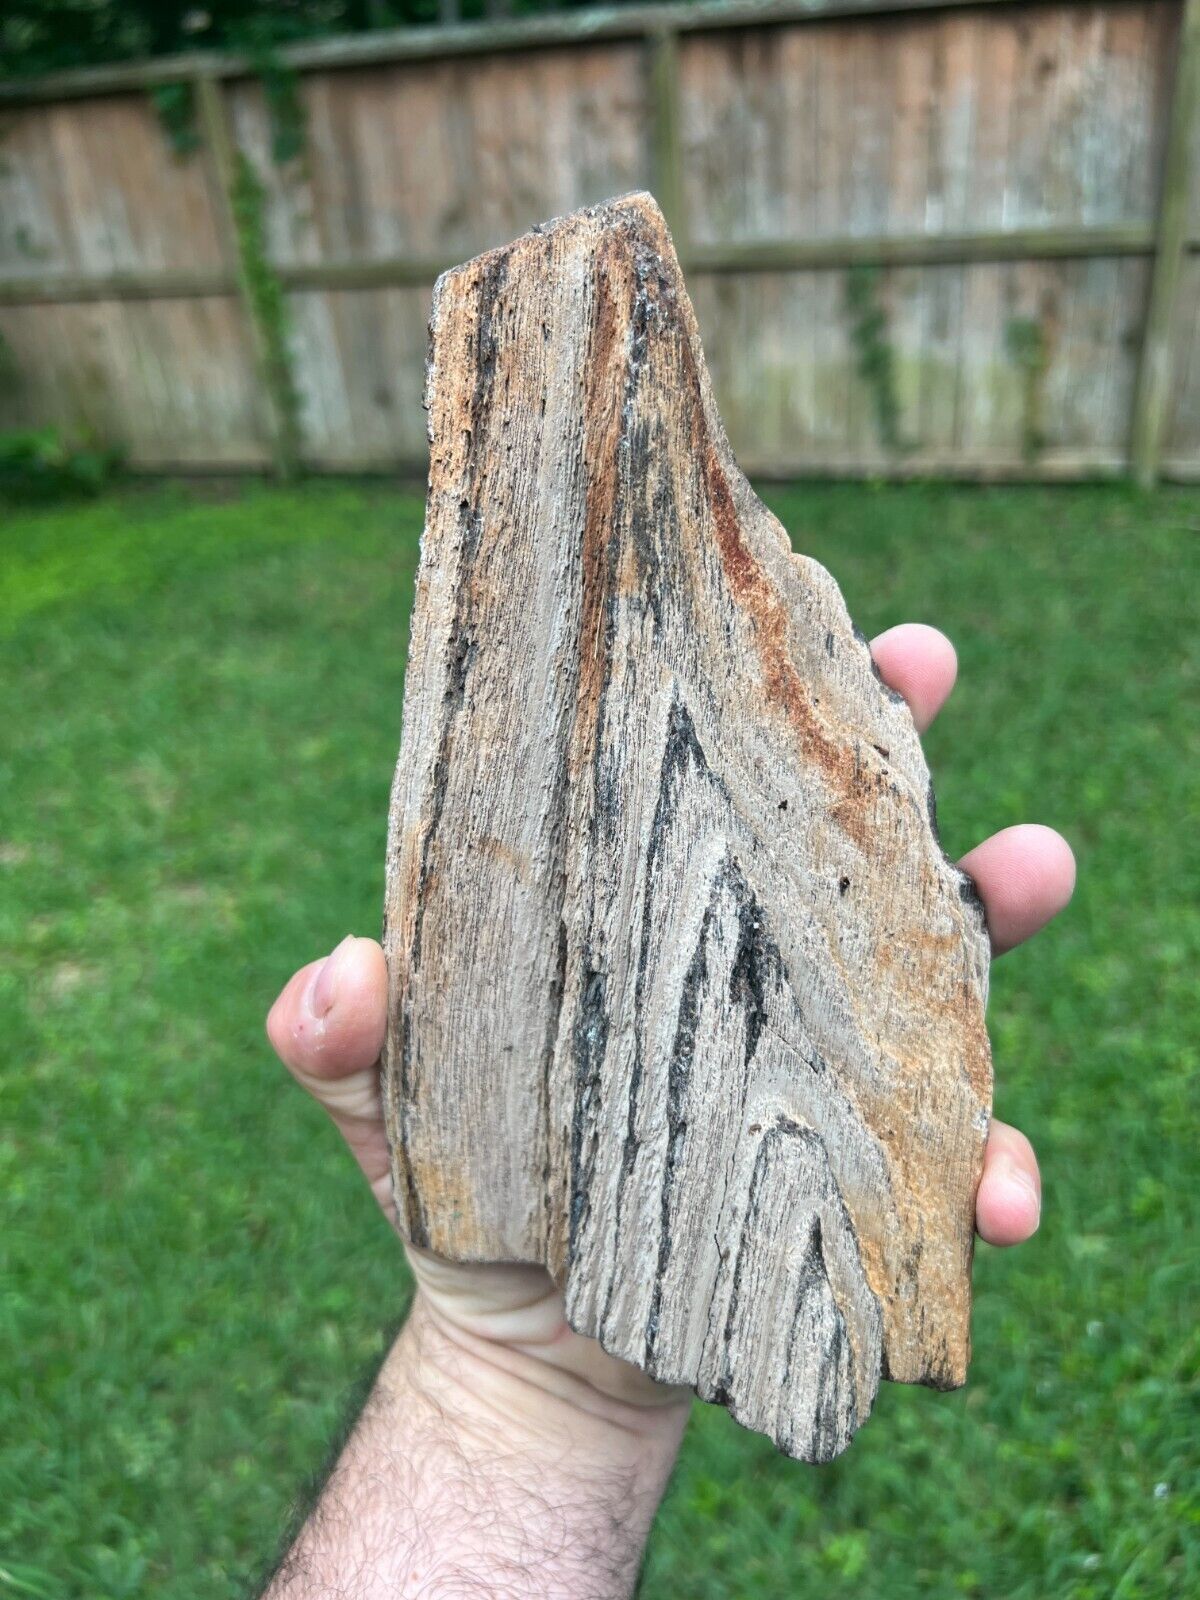 Texas Petrified Wood Unique Natural Worn Grain Pattern Tree Log Piece Fossil